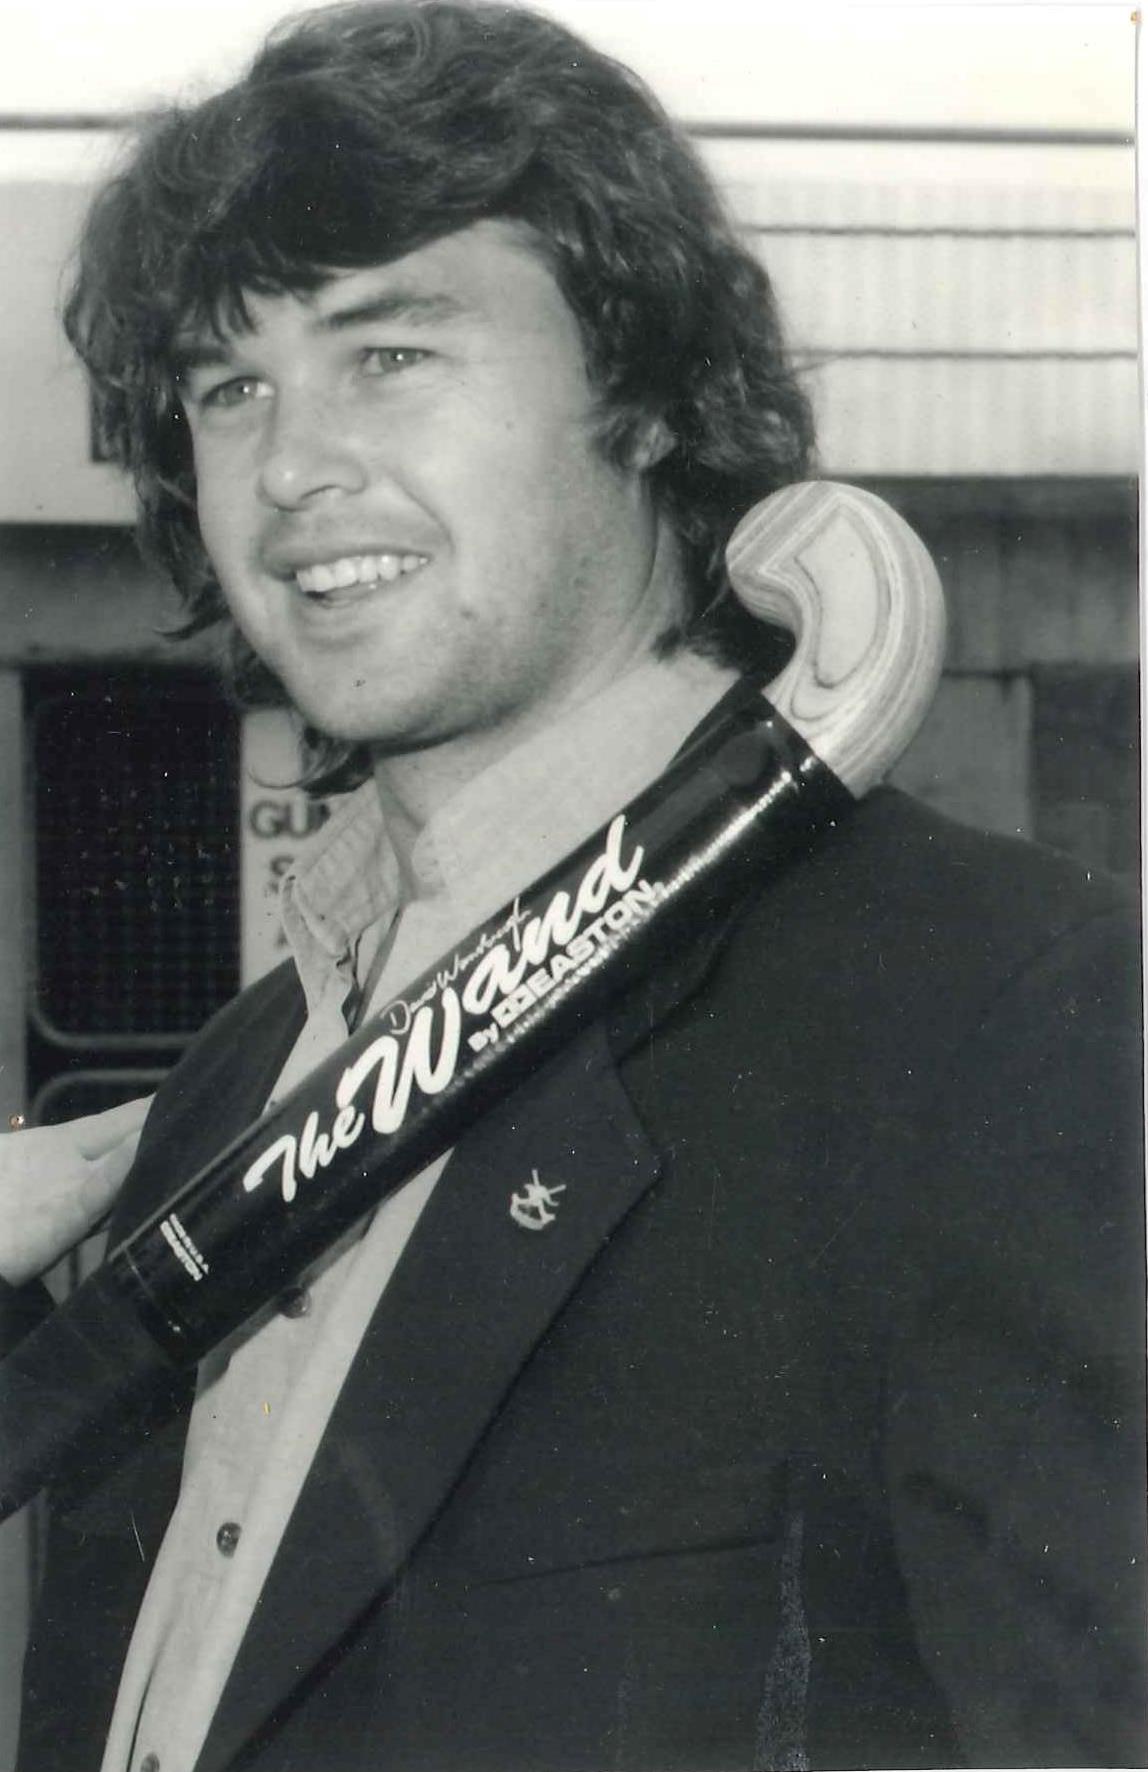 Stephen Davies, sans headband, posing with "The Wand". John Davies says this was a popular hockey stick at the time. Made by Easton it was aluminium frame with a wooden head. They were later banned by FIH due to the wooden head detaching from the aluminium! Photograph courtesy of John and Brenda Davies